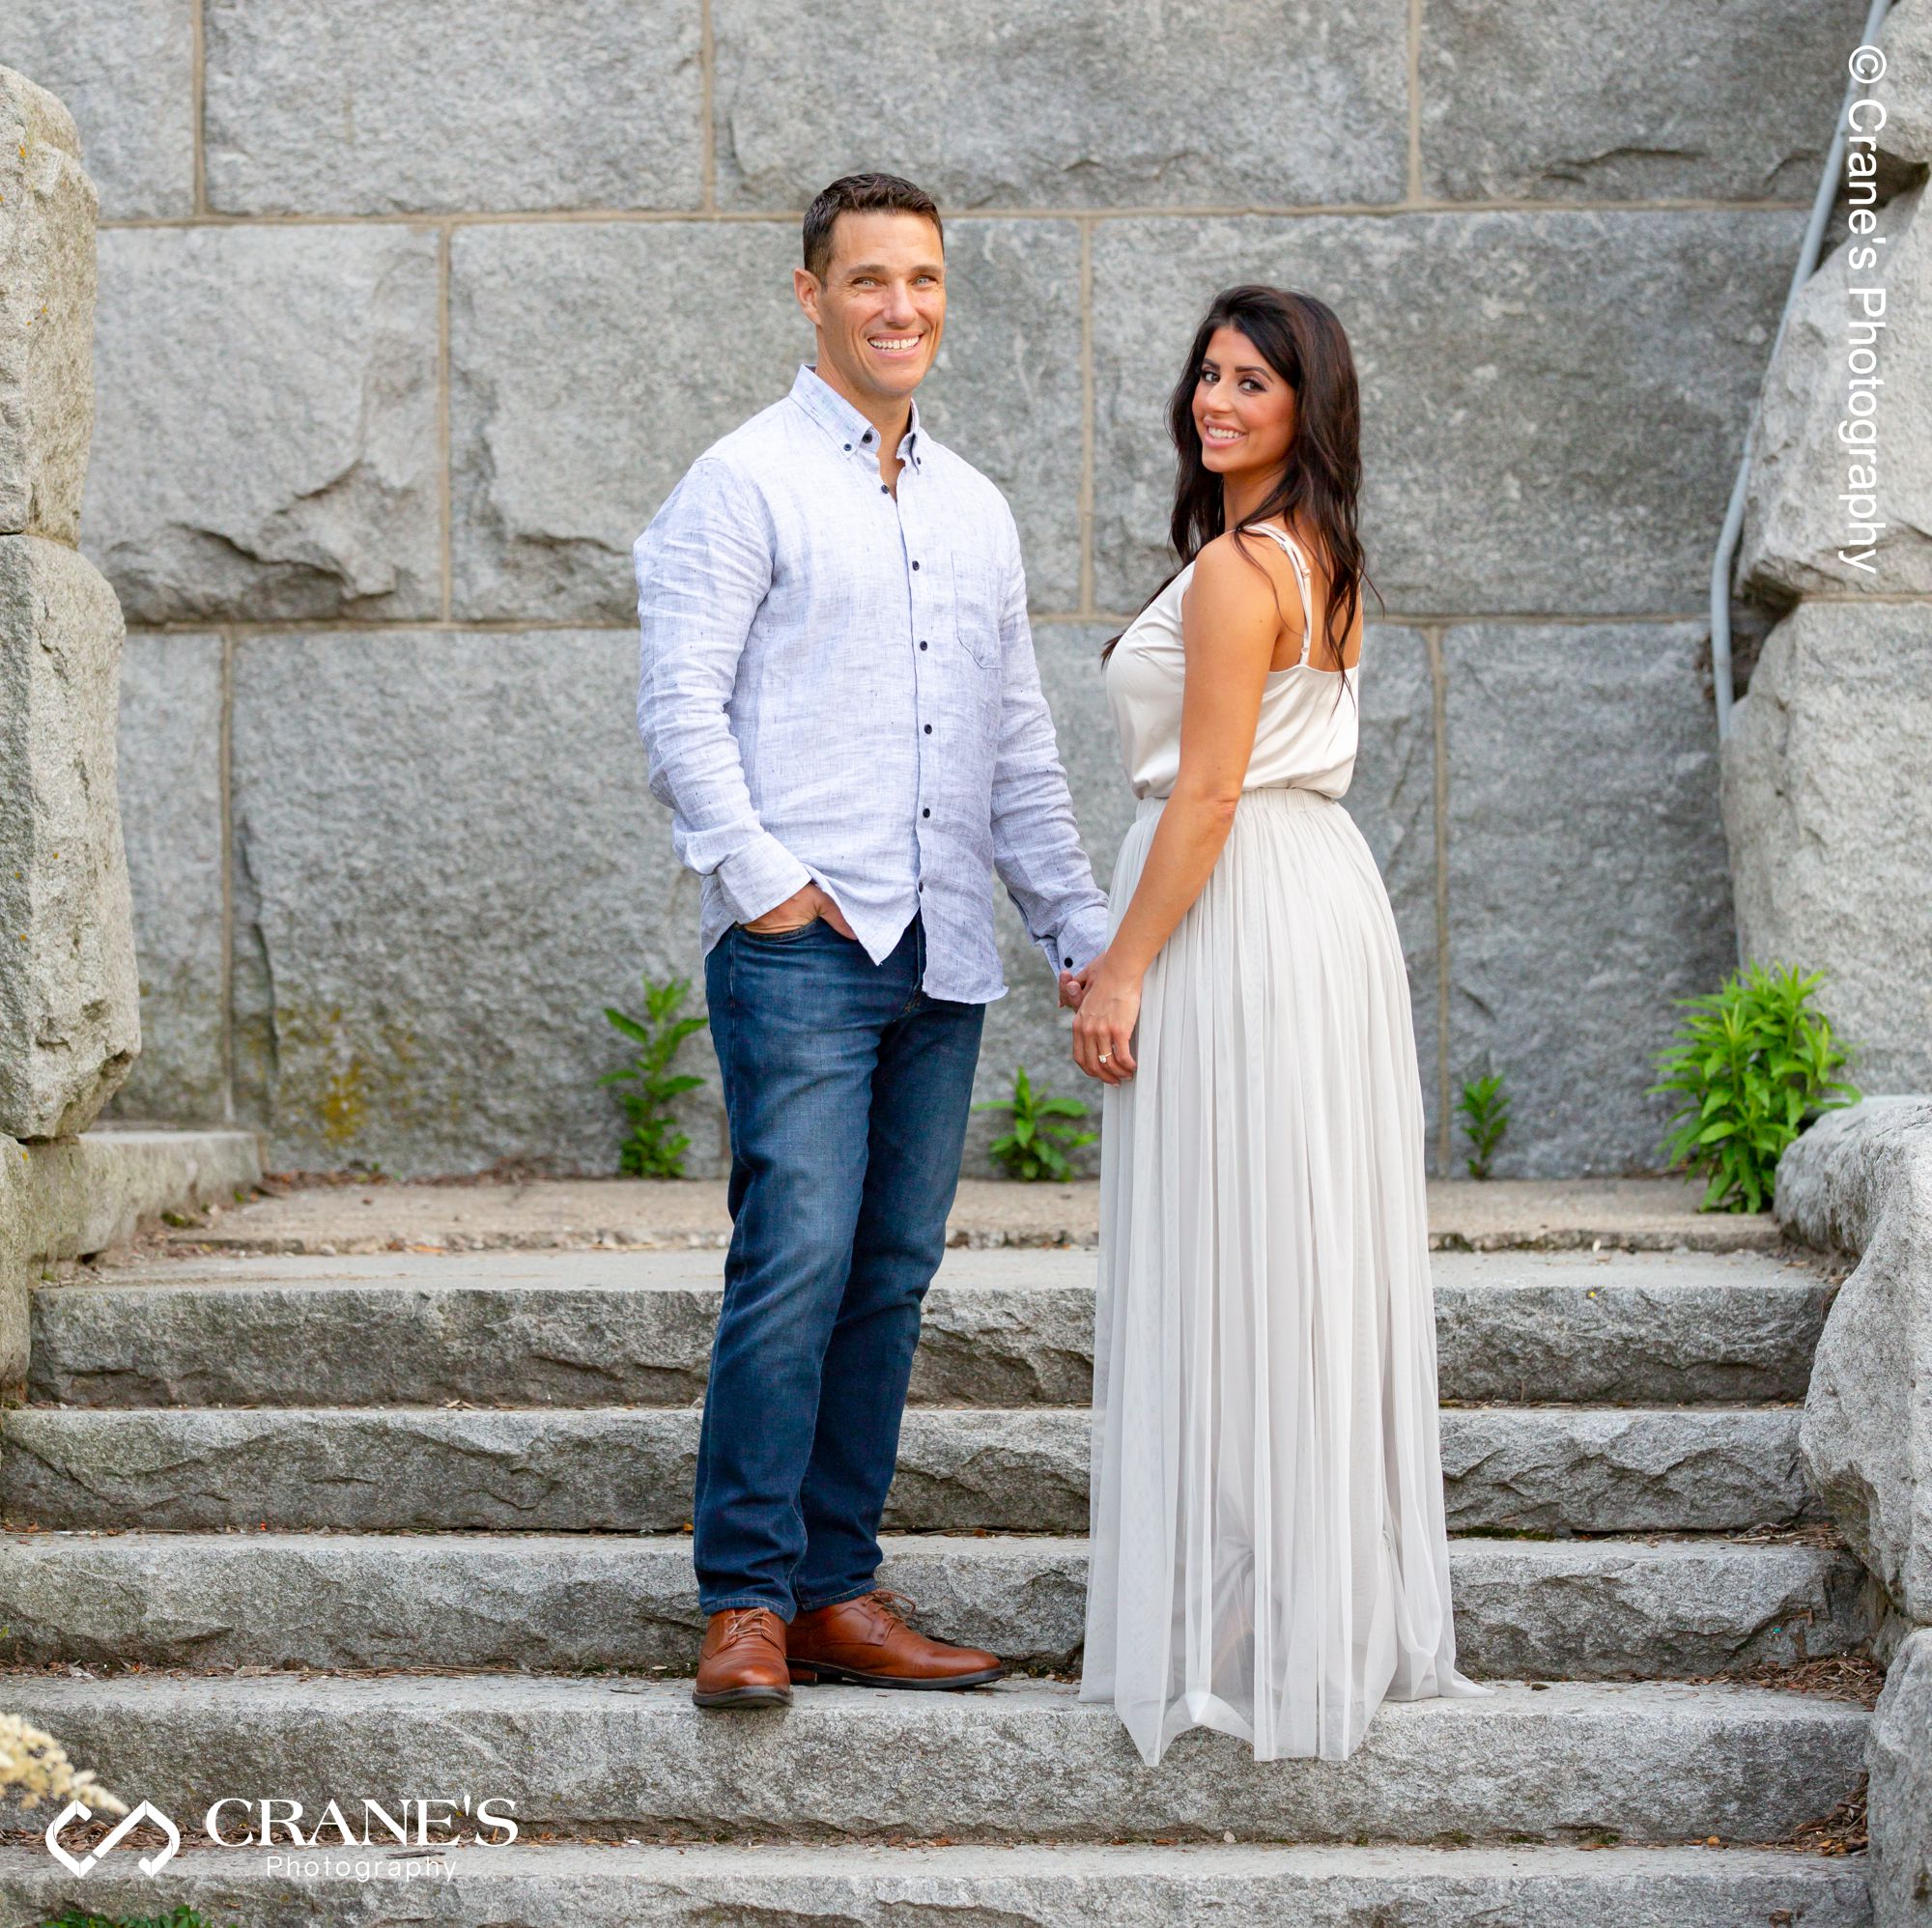 An engagement session photo of couple holding hands taken at the Ulysses S. Grant Monument stairs near North Ave Beach